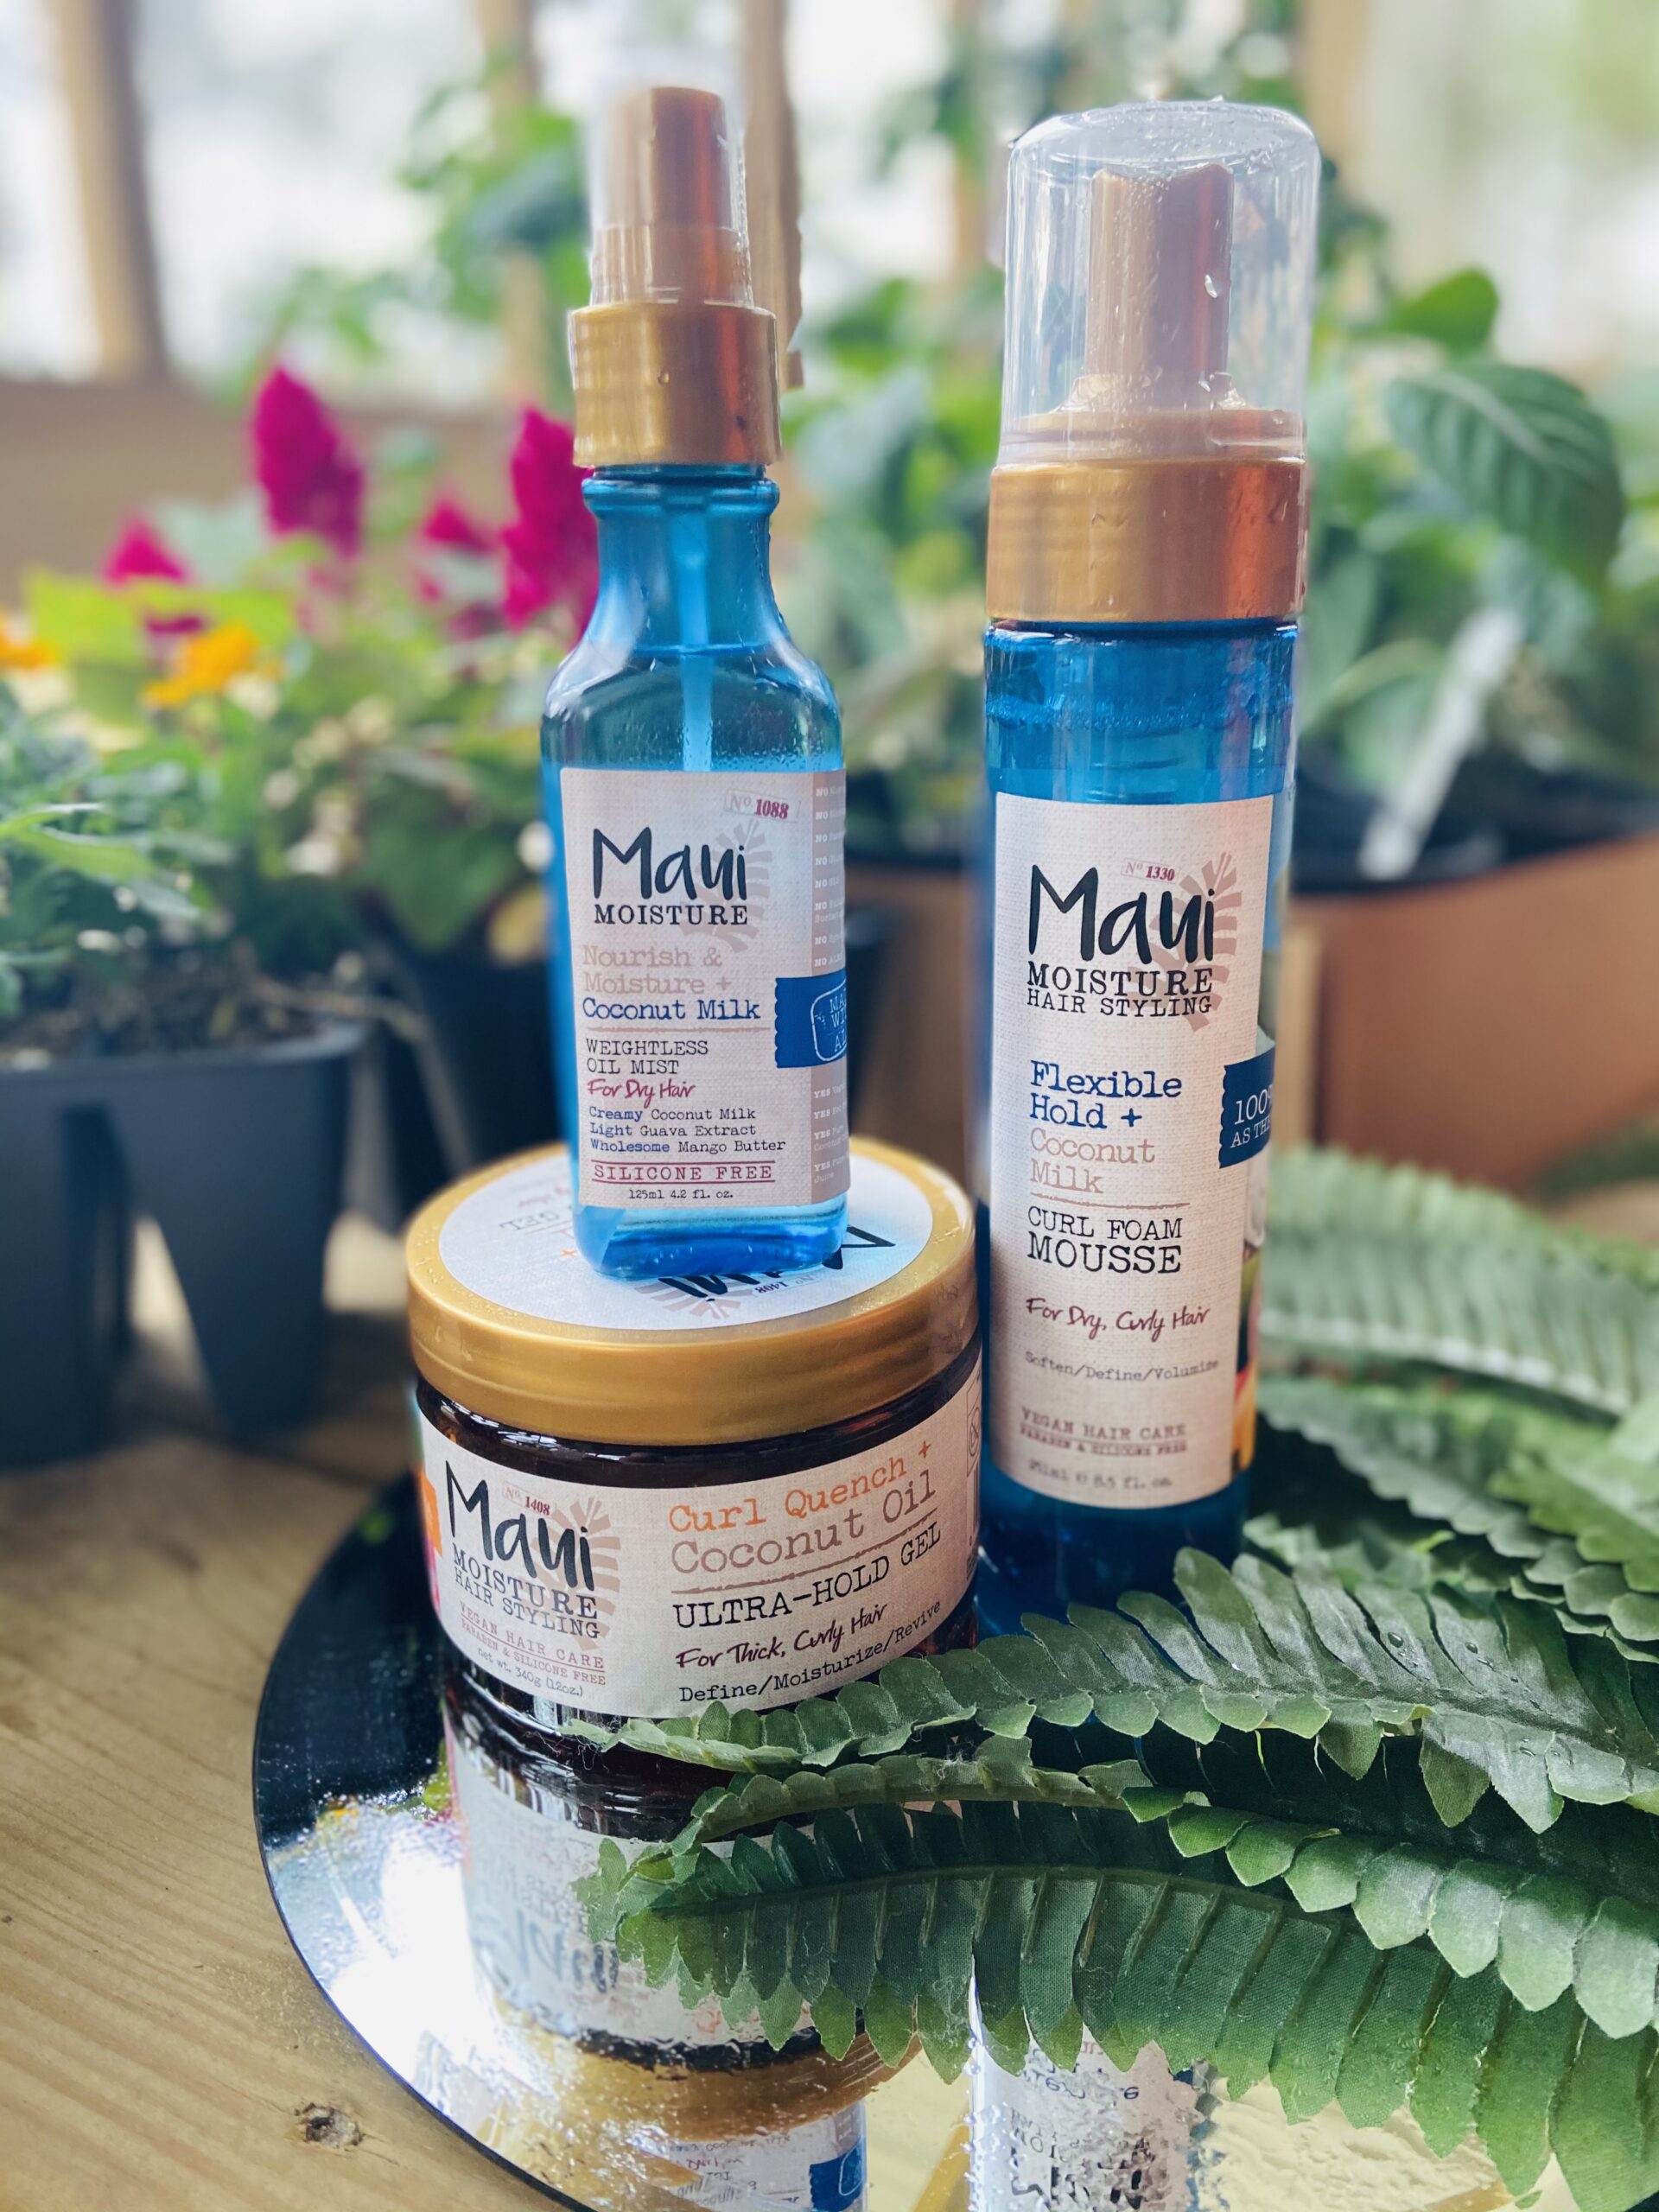 3 Products Every Curly Girl Needs from the Maui Moisture Nourish & Moisture Coconut Milk Collection